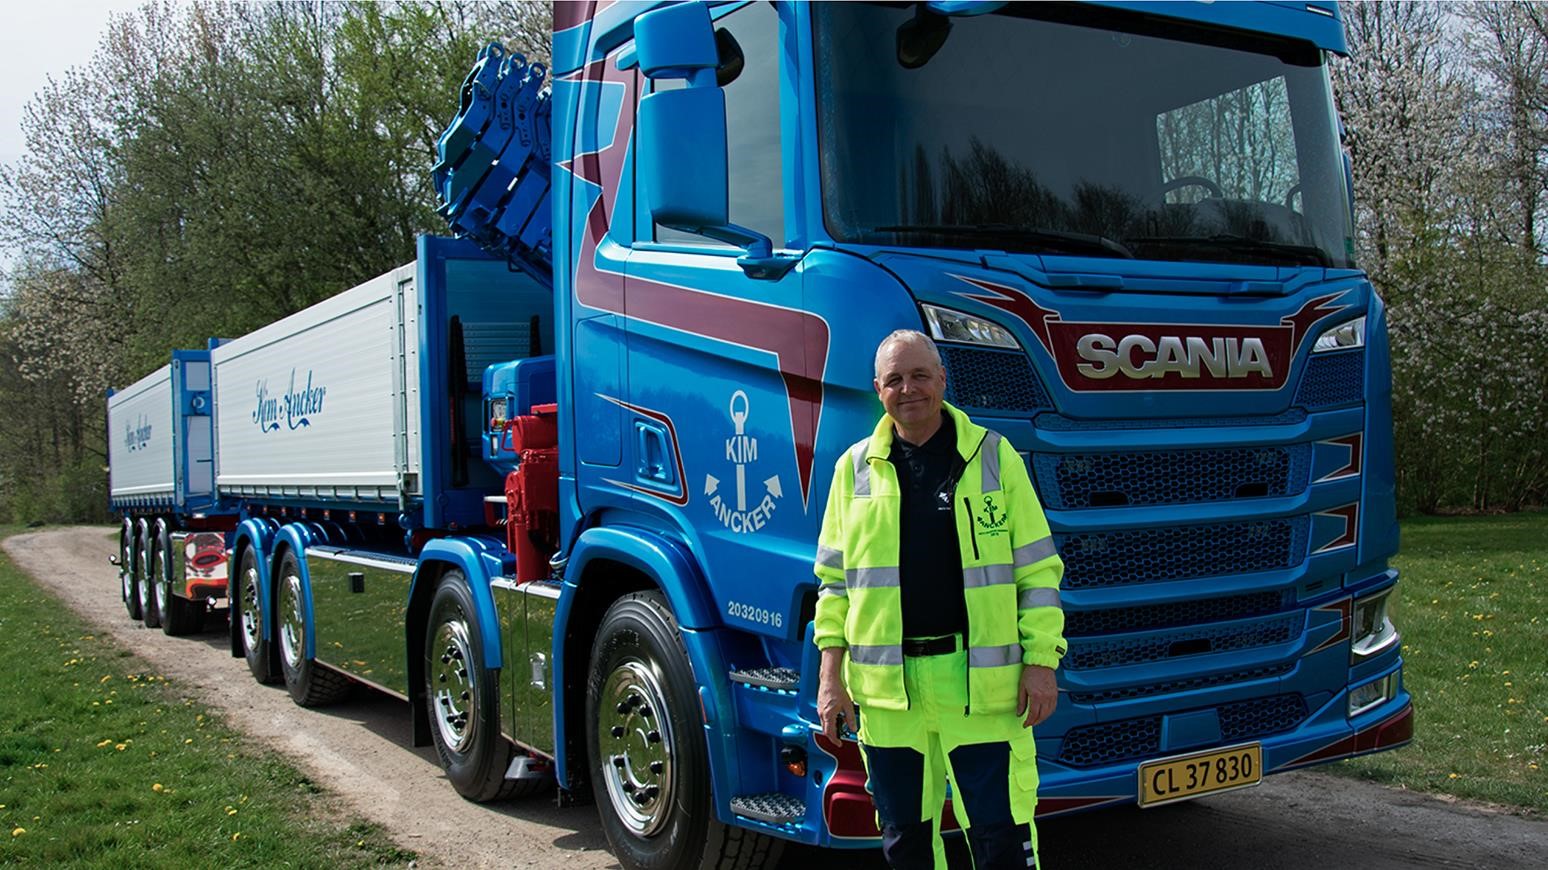 Danish Transport Company’s New Scania R 250 Is Equipped With A Life-Saving Heart Defibrillator